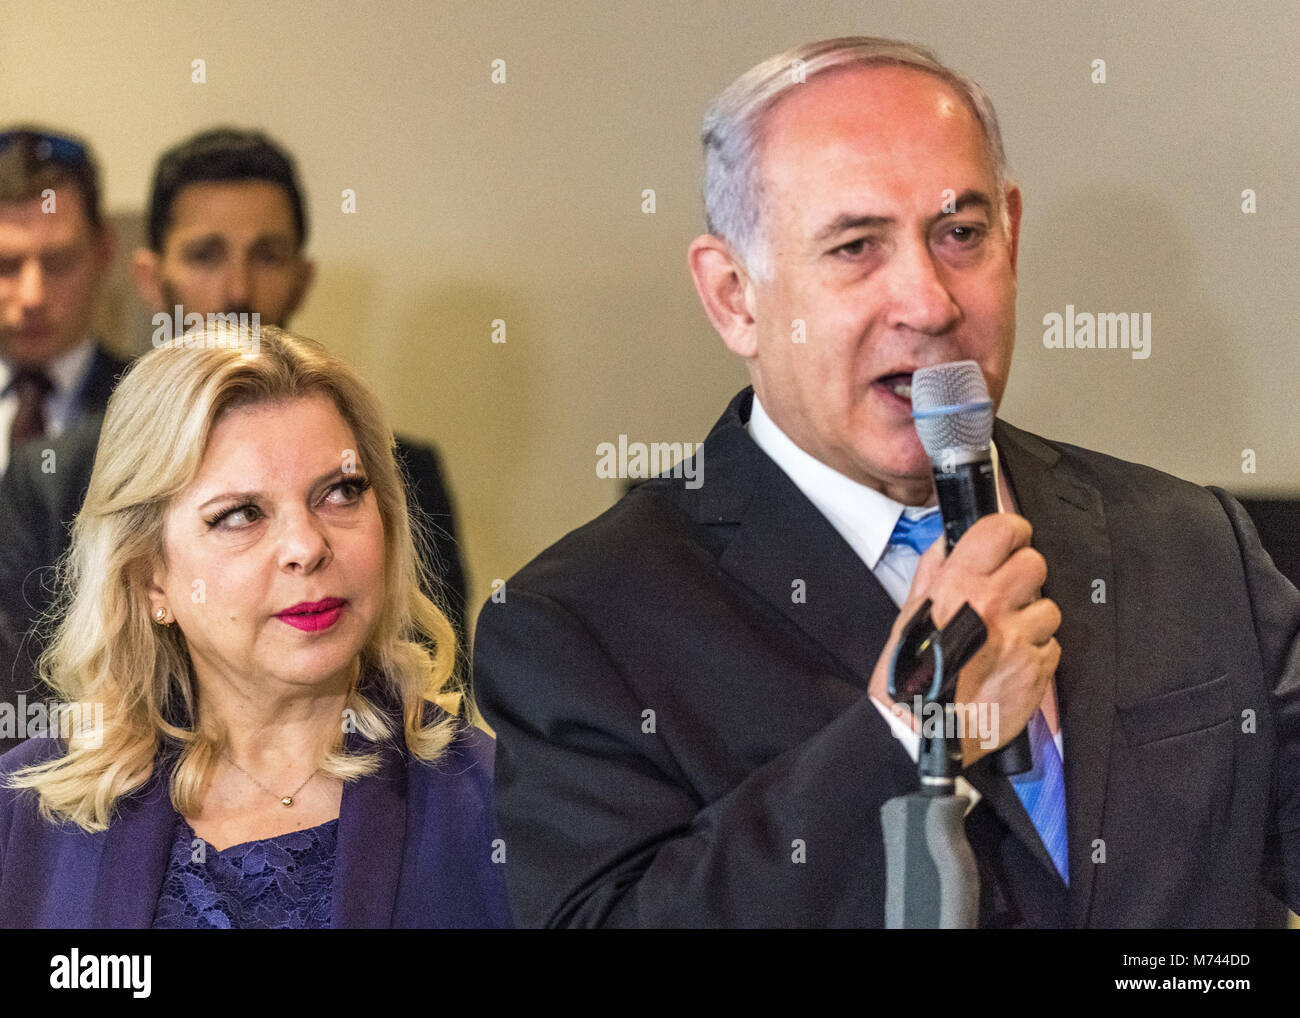 New York, USA, 8 Mar 2018. Sara Netanyahu looks at his husband Israeli Prime Minister Benjamin Netanyahu speaking during the opening of a special exhibit on Jewish presence in Jerusalem at the United Nations Headquarters in New York City,  Photo by Enrique Shore/Alamy Live News Stock Photo